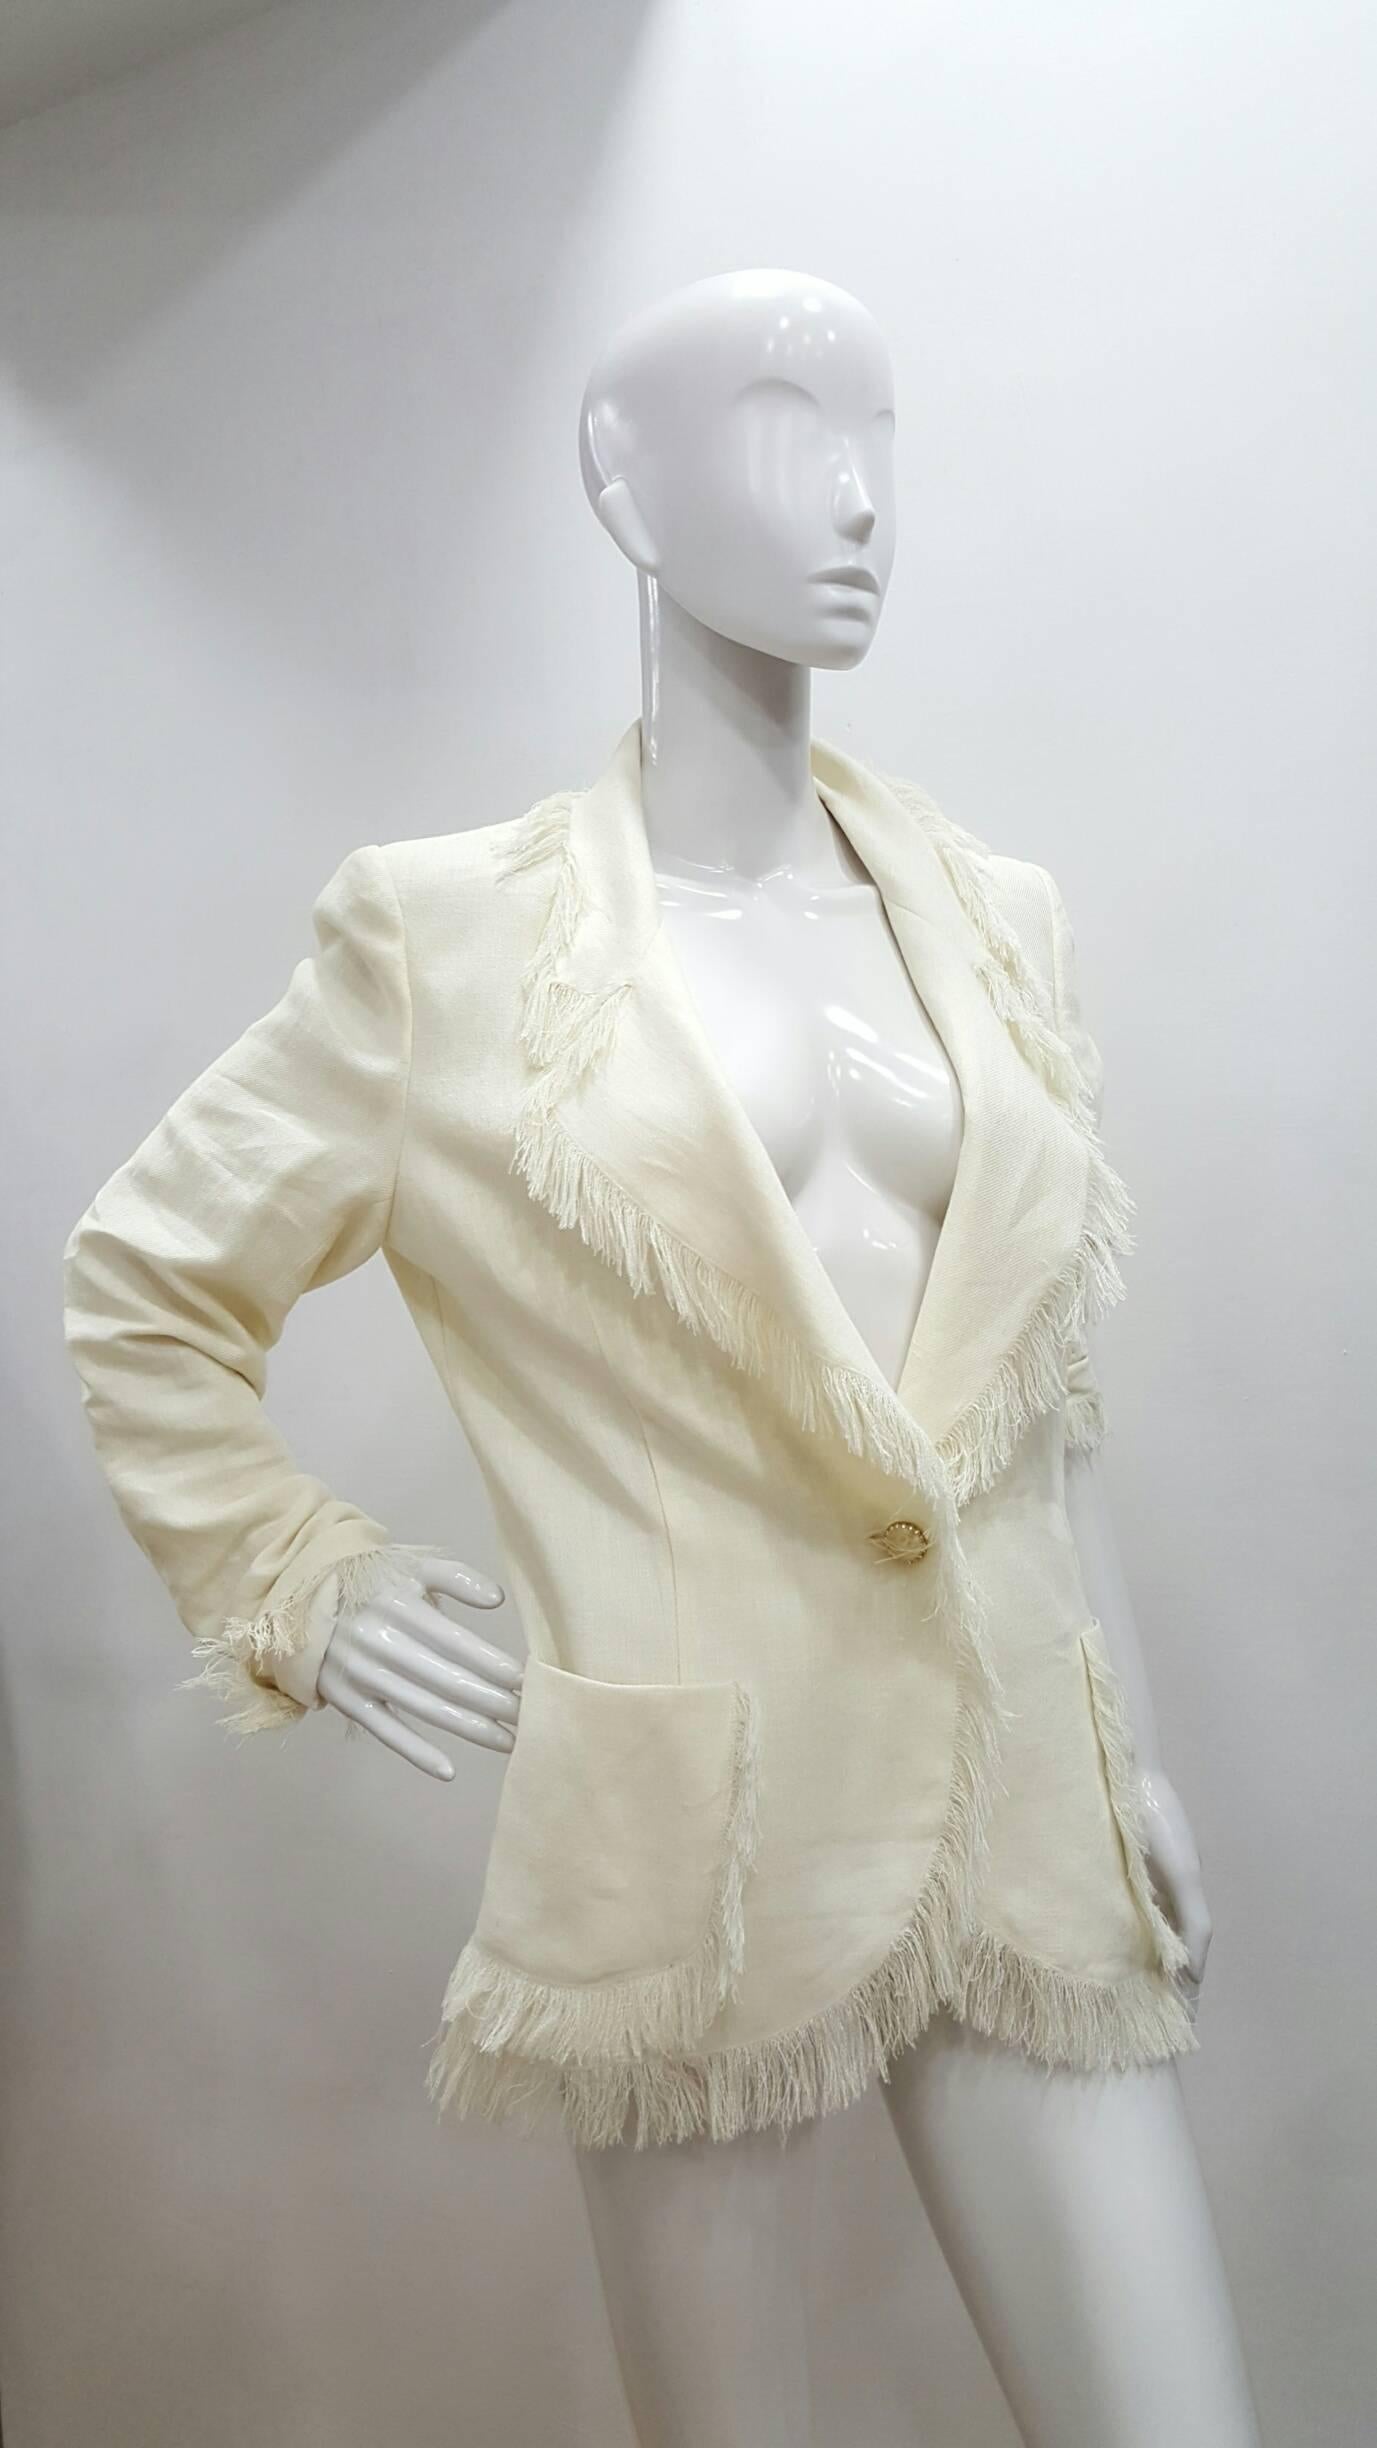 2000s Emanuel Ungaro Linen Cream JAcket with fringes
Composition: 87% linen 13% polyammide
Italian size range 42
Dry clean only
no lining inside